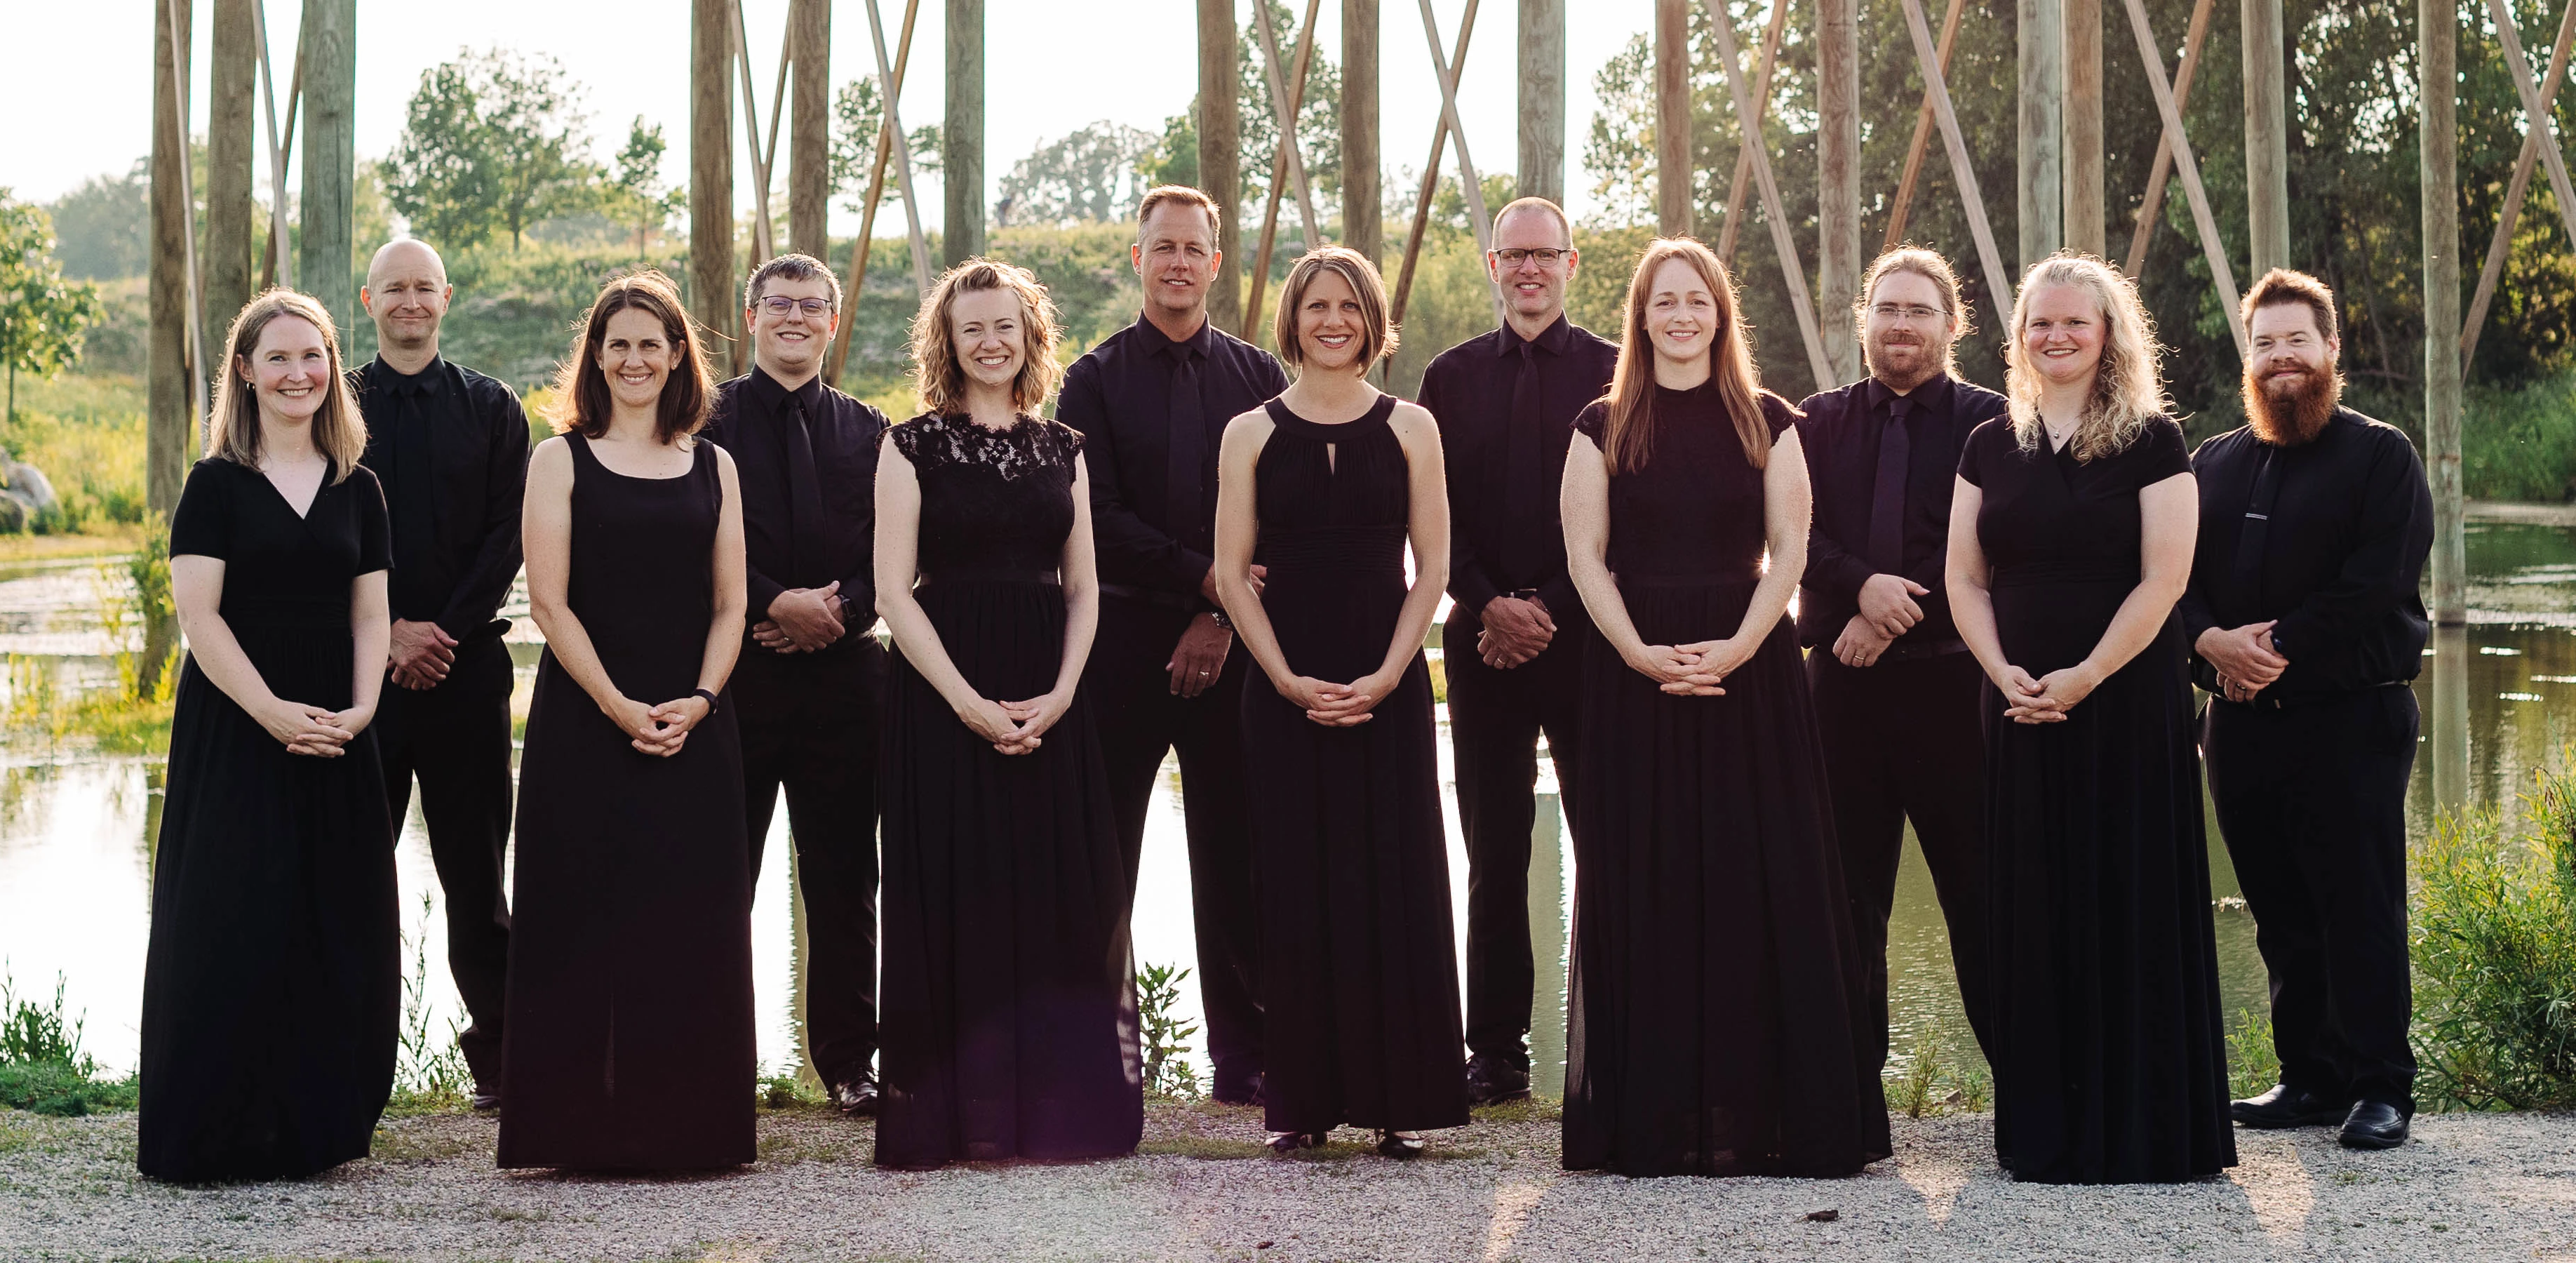 The Choral Scholars